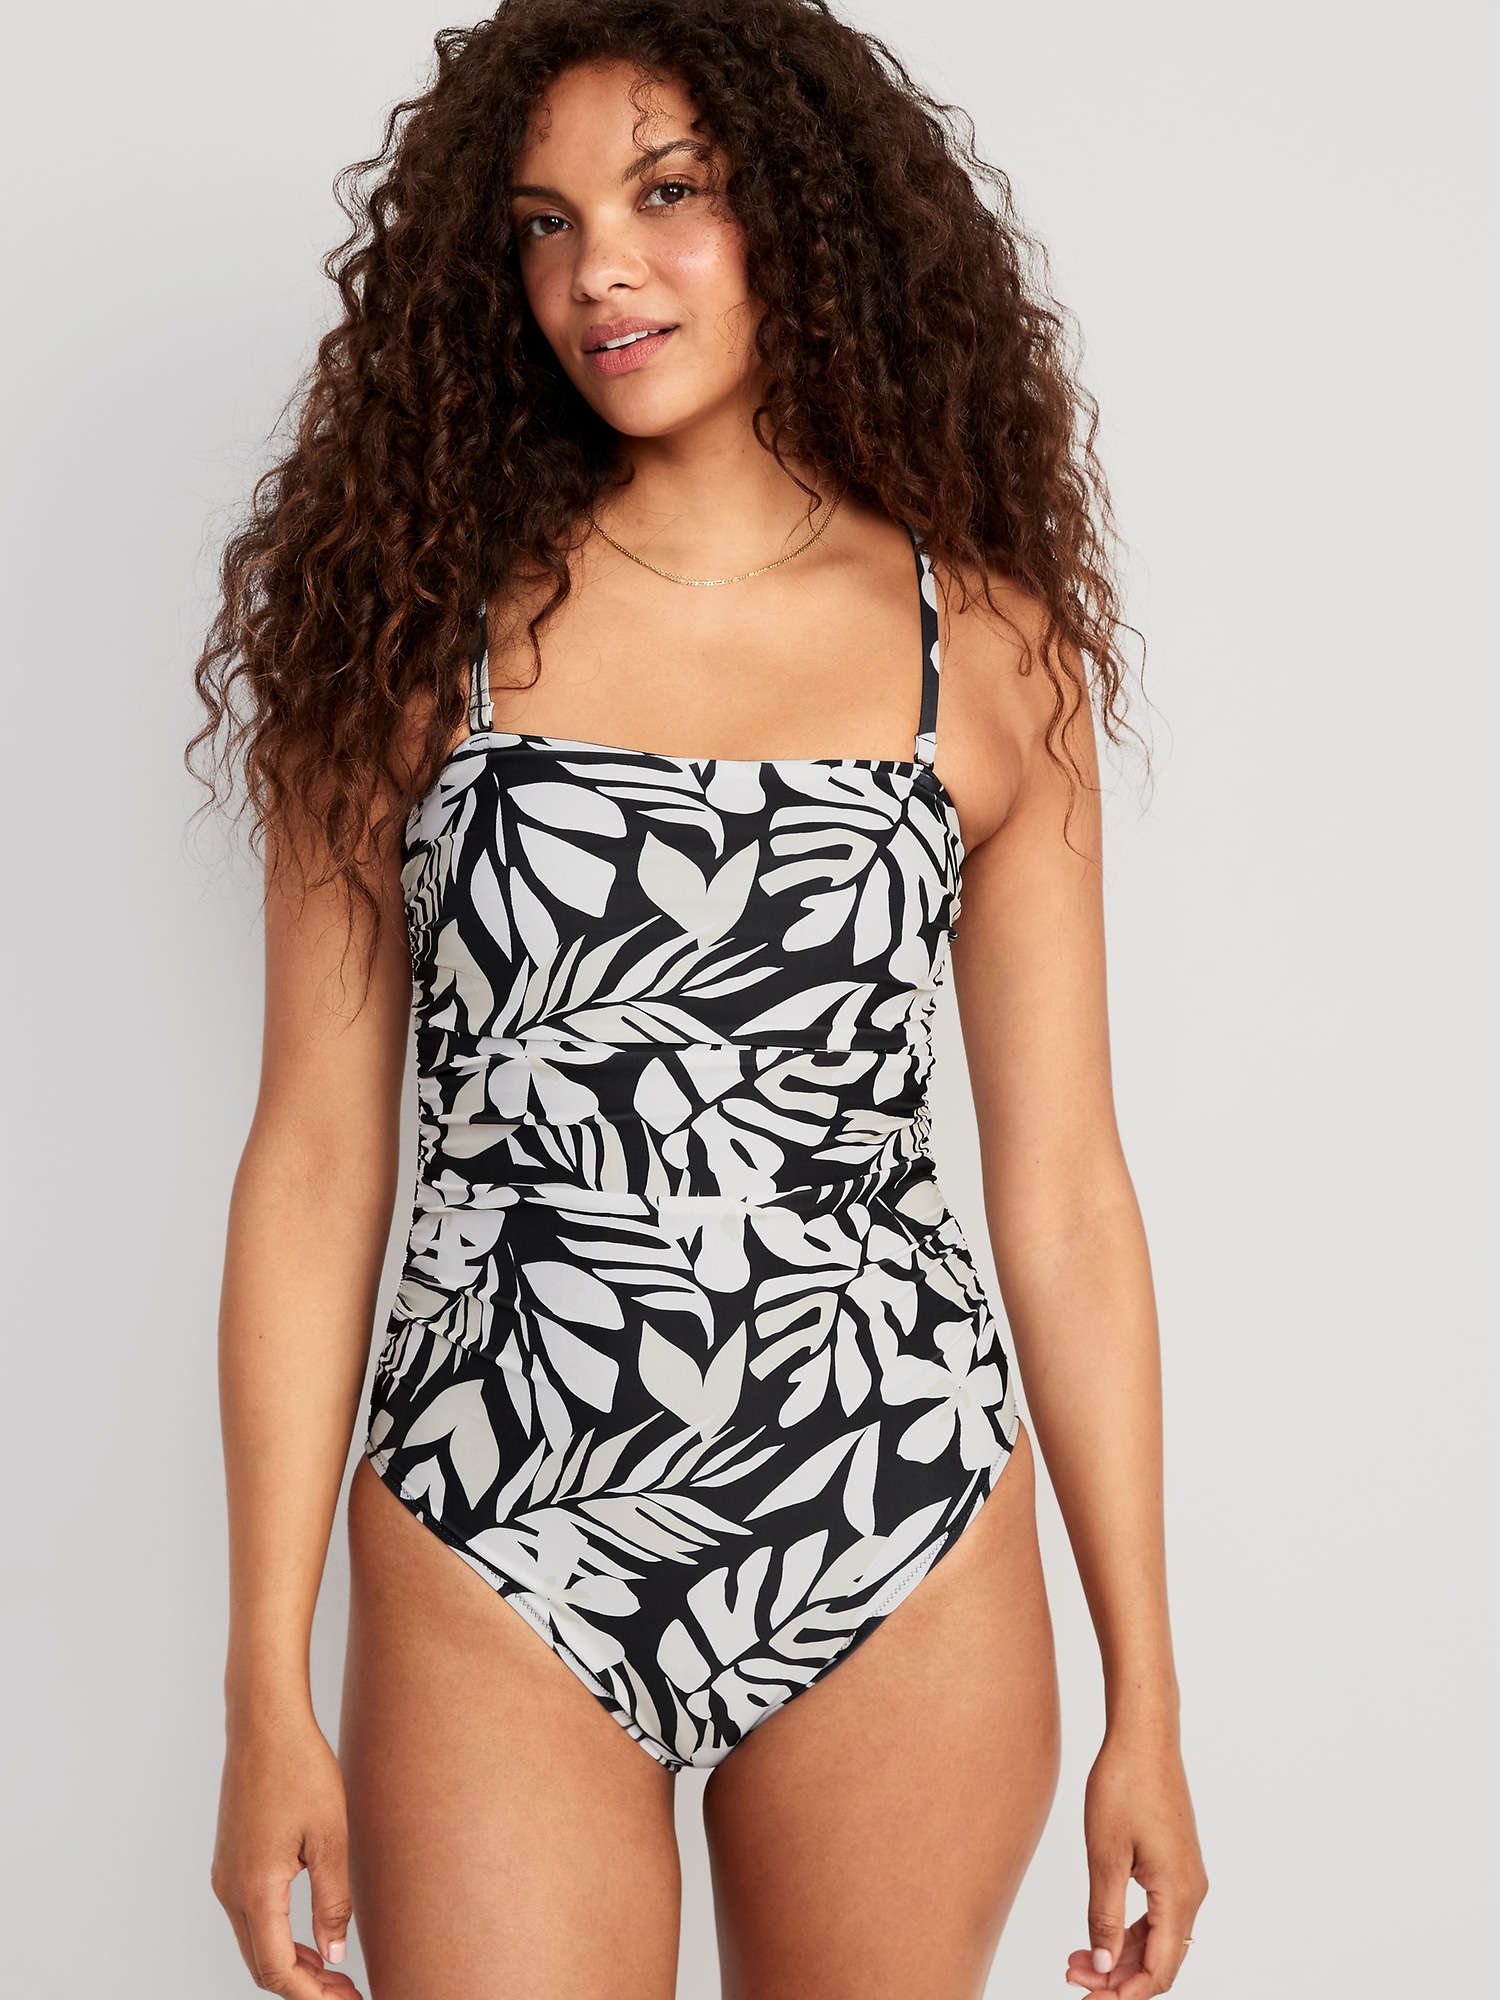 Old Navy Convertible Bandeau One-Piece Swimsuit for Women multi. 1